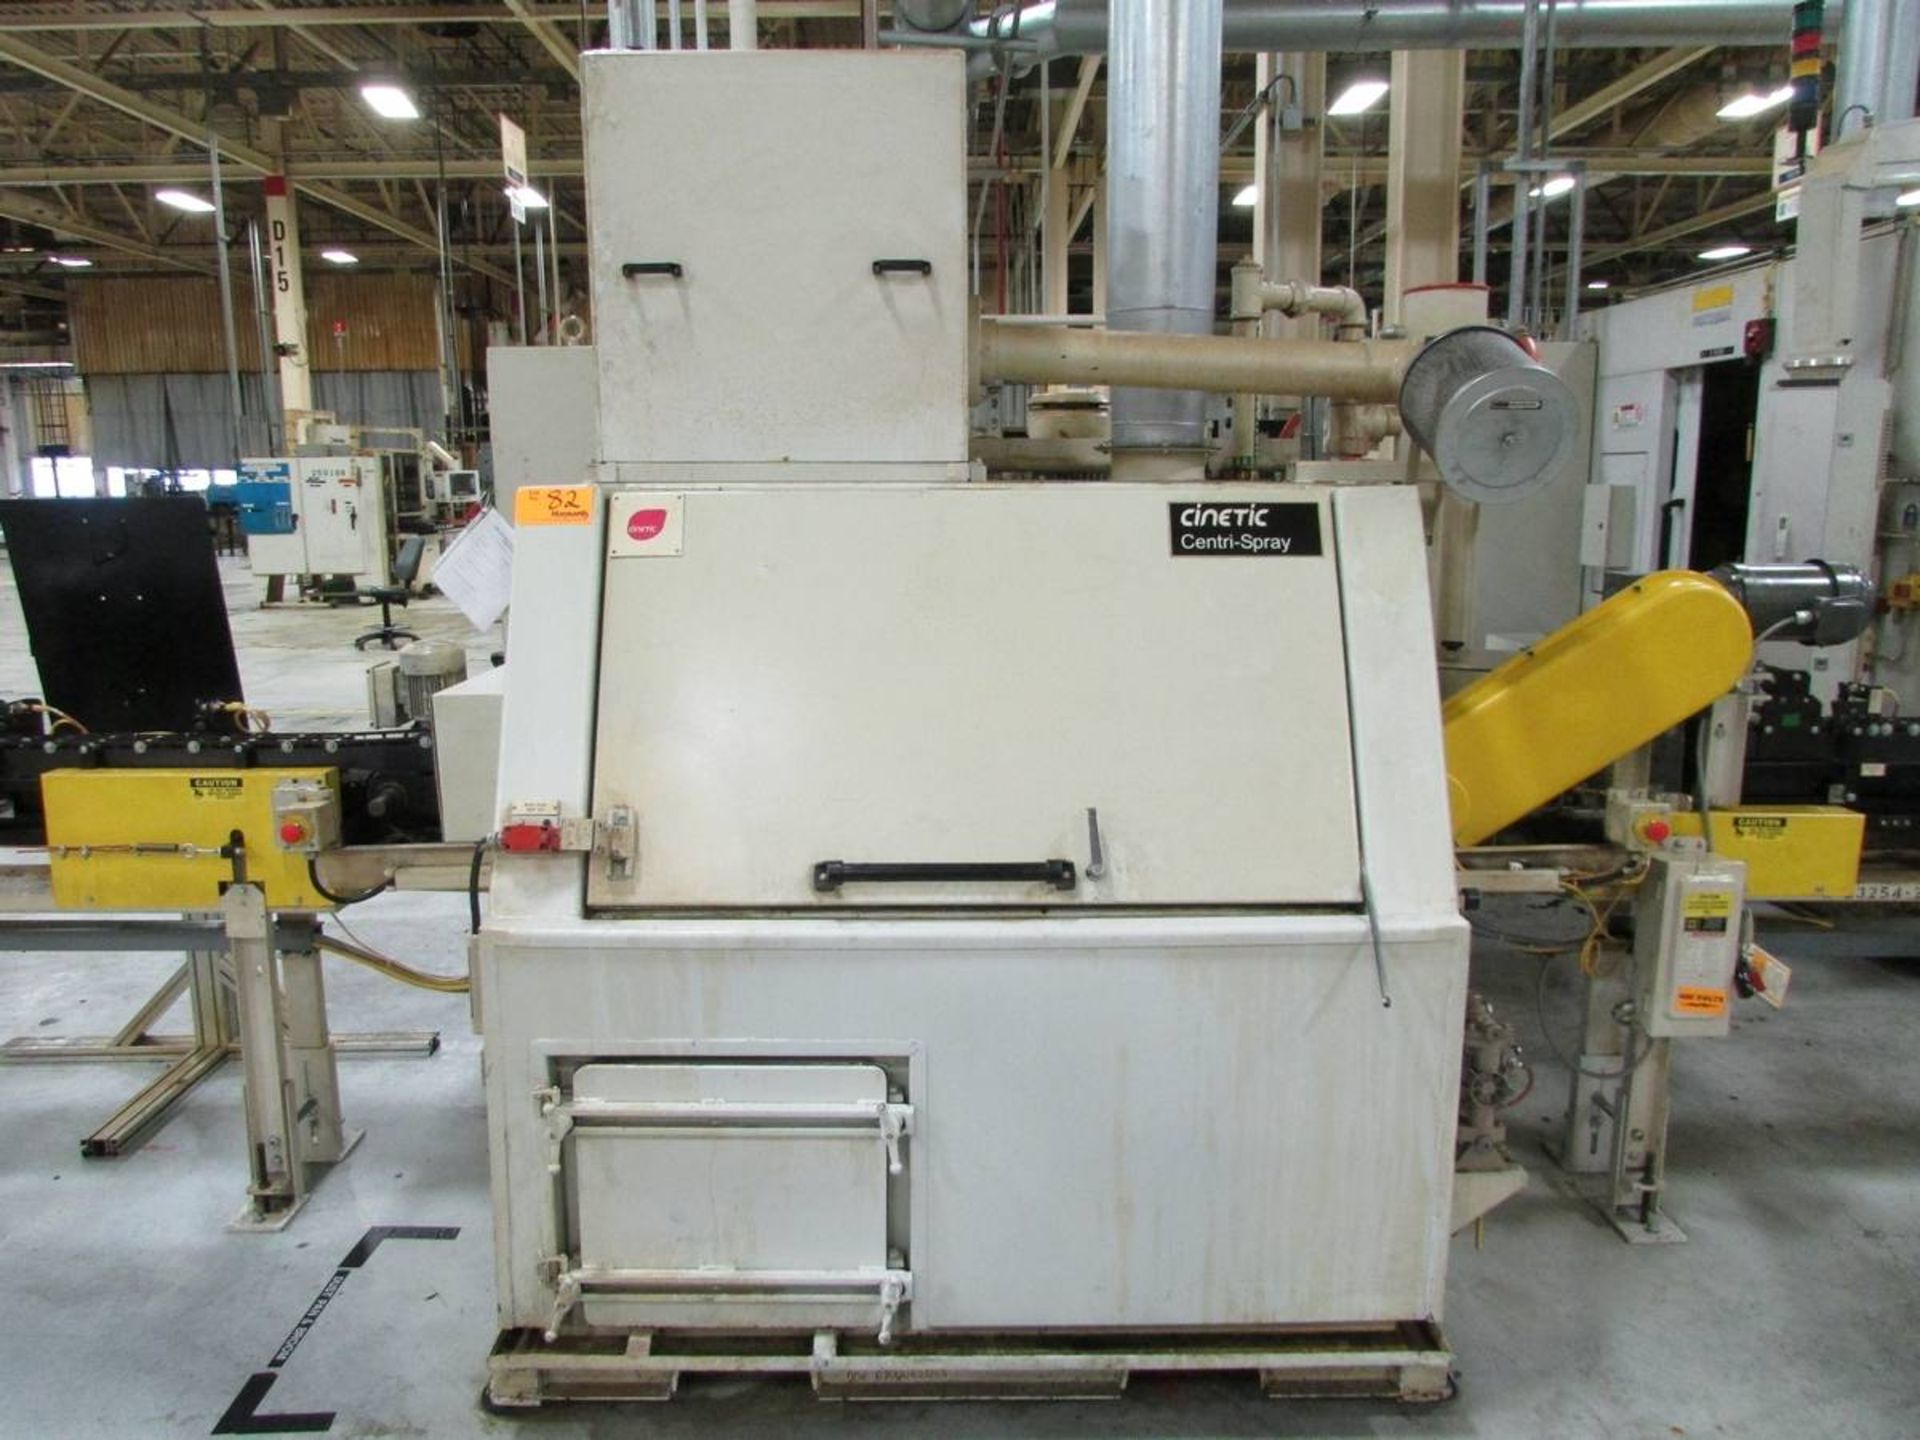 2006 Cinetic Centri-Spray Hybrid Two Stage Automatic Parts Wash Machine - Image 2 of 15